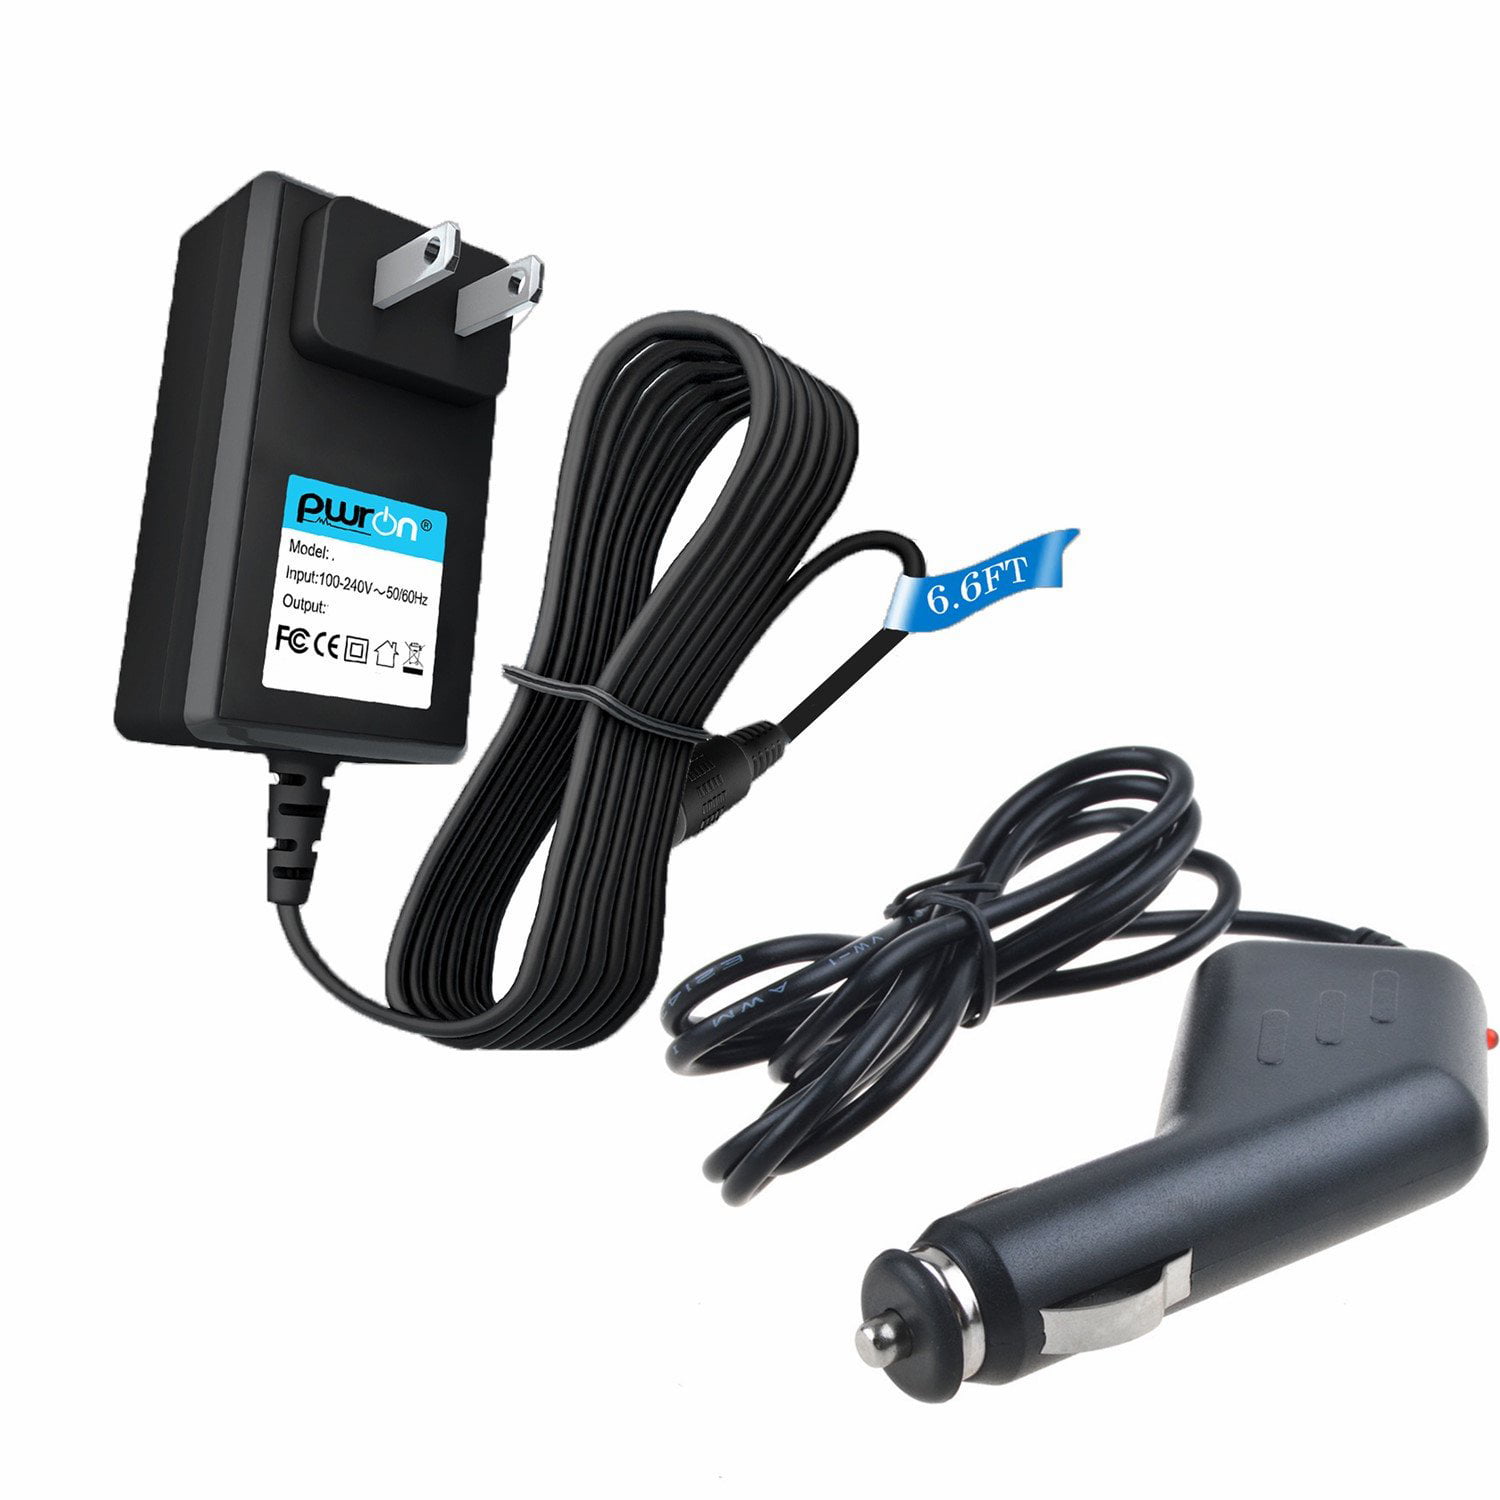 PwrON 5V 2A AC Adapter Charger For iRulu eXpro X1 Android Tablet Power Supply 